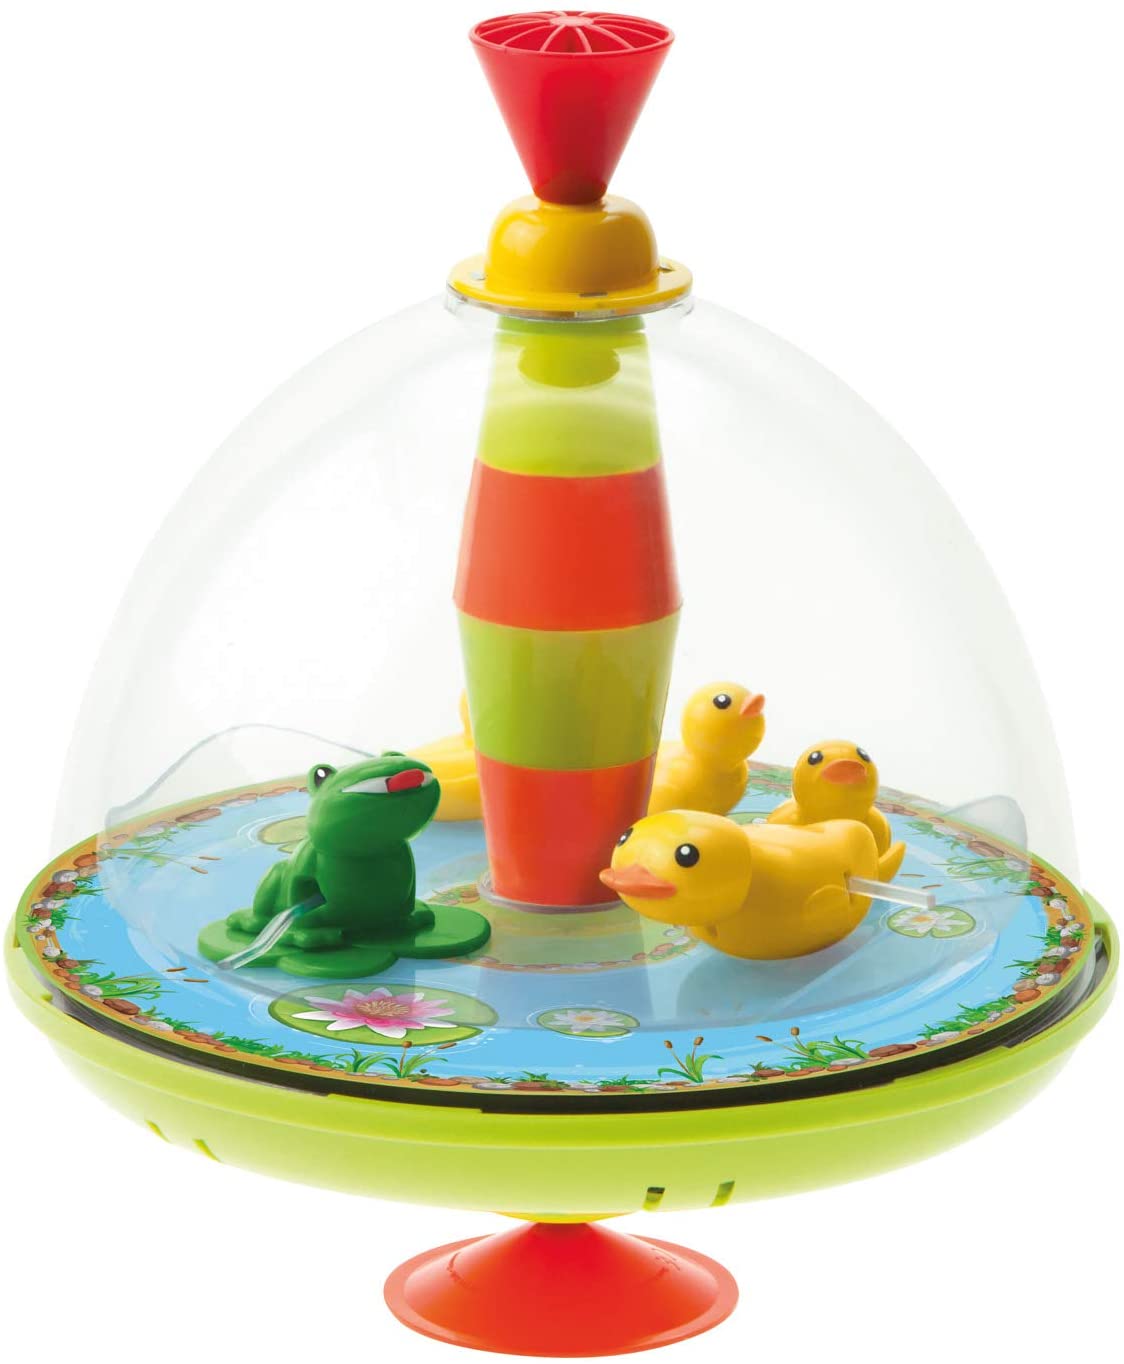 Bolz 52130 Panoramic Spinning Top Duck Family Approx. 19 cm, Plastic Swing Gyro, Classic Pump Gyroscope with Duck Motif, Gyro with Stand, Toy Spinning Top for Children from 18 Months